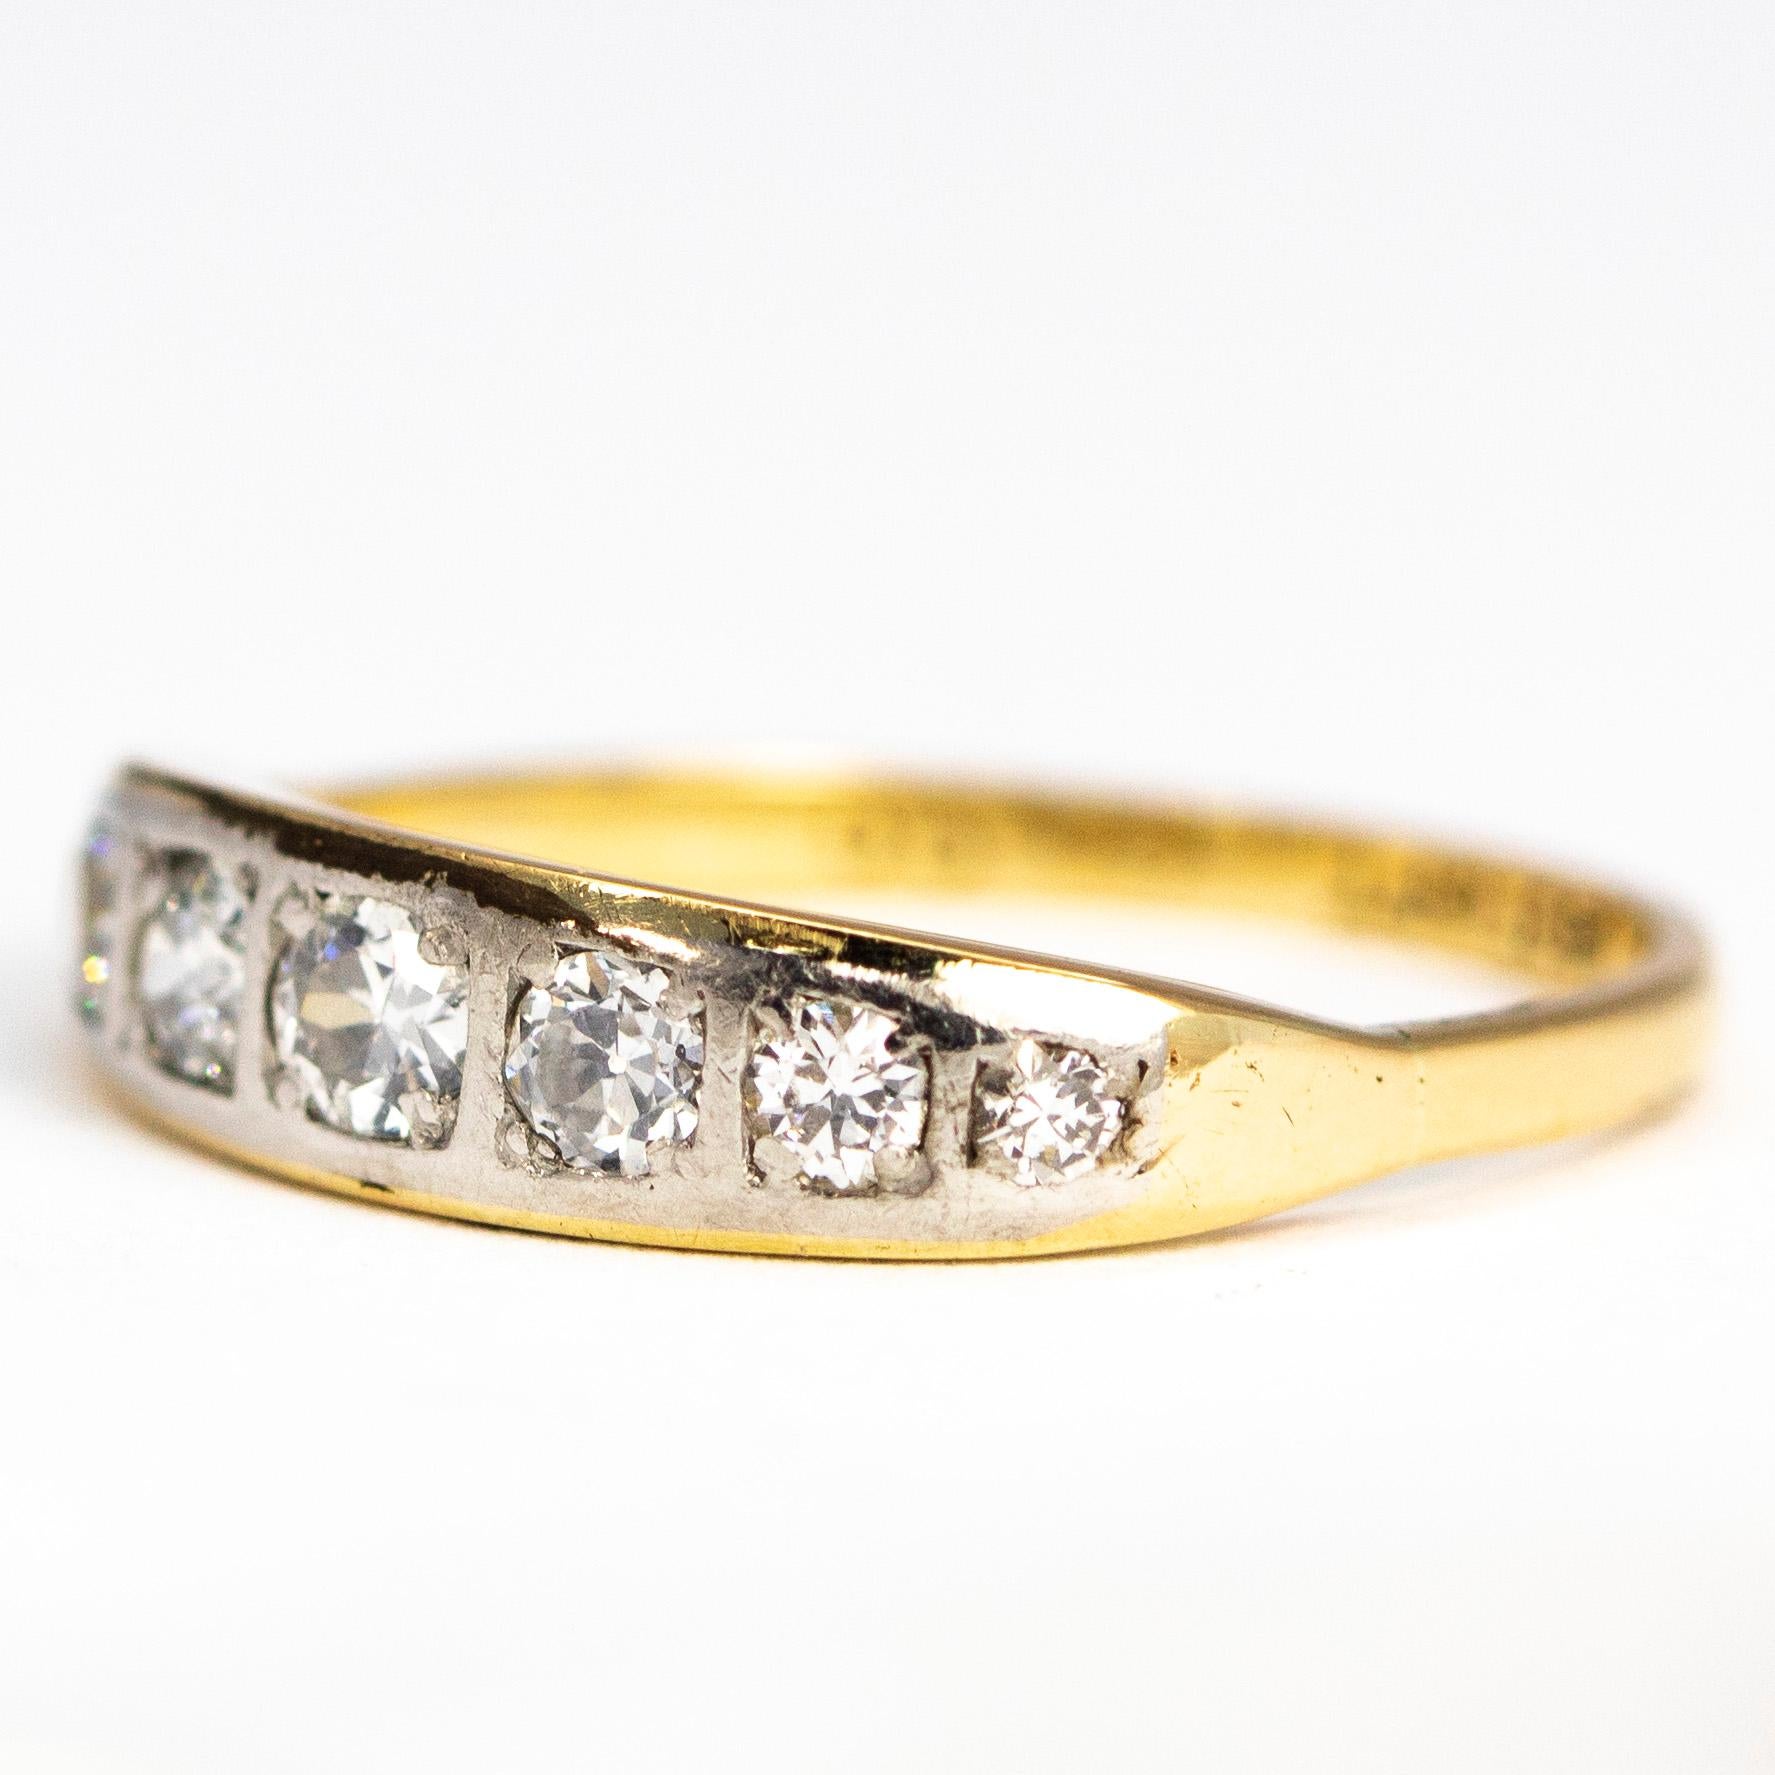 Approximately 70pts of diamonds are held in this beautiful piece. All the stones are set flush in platinum and the rest of the band is modelled in 18ct gold. The size of the stones are slightly graduated starting with the largest diamond in the